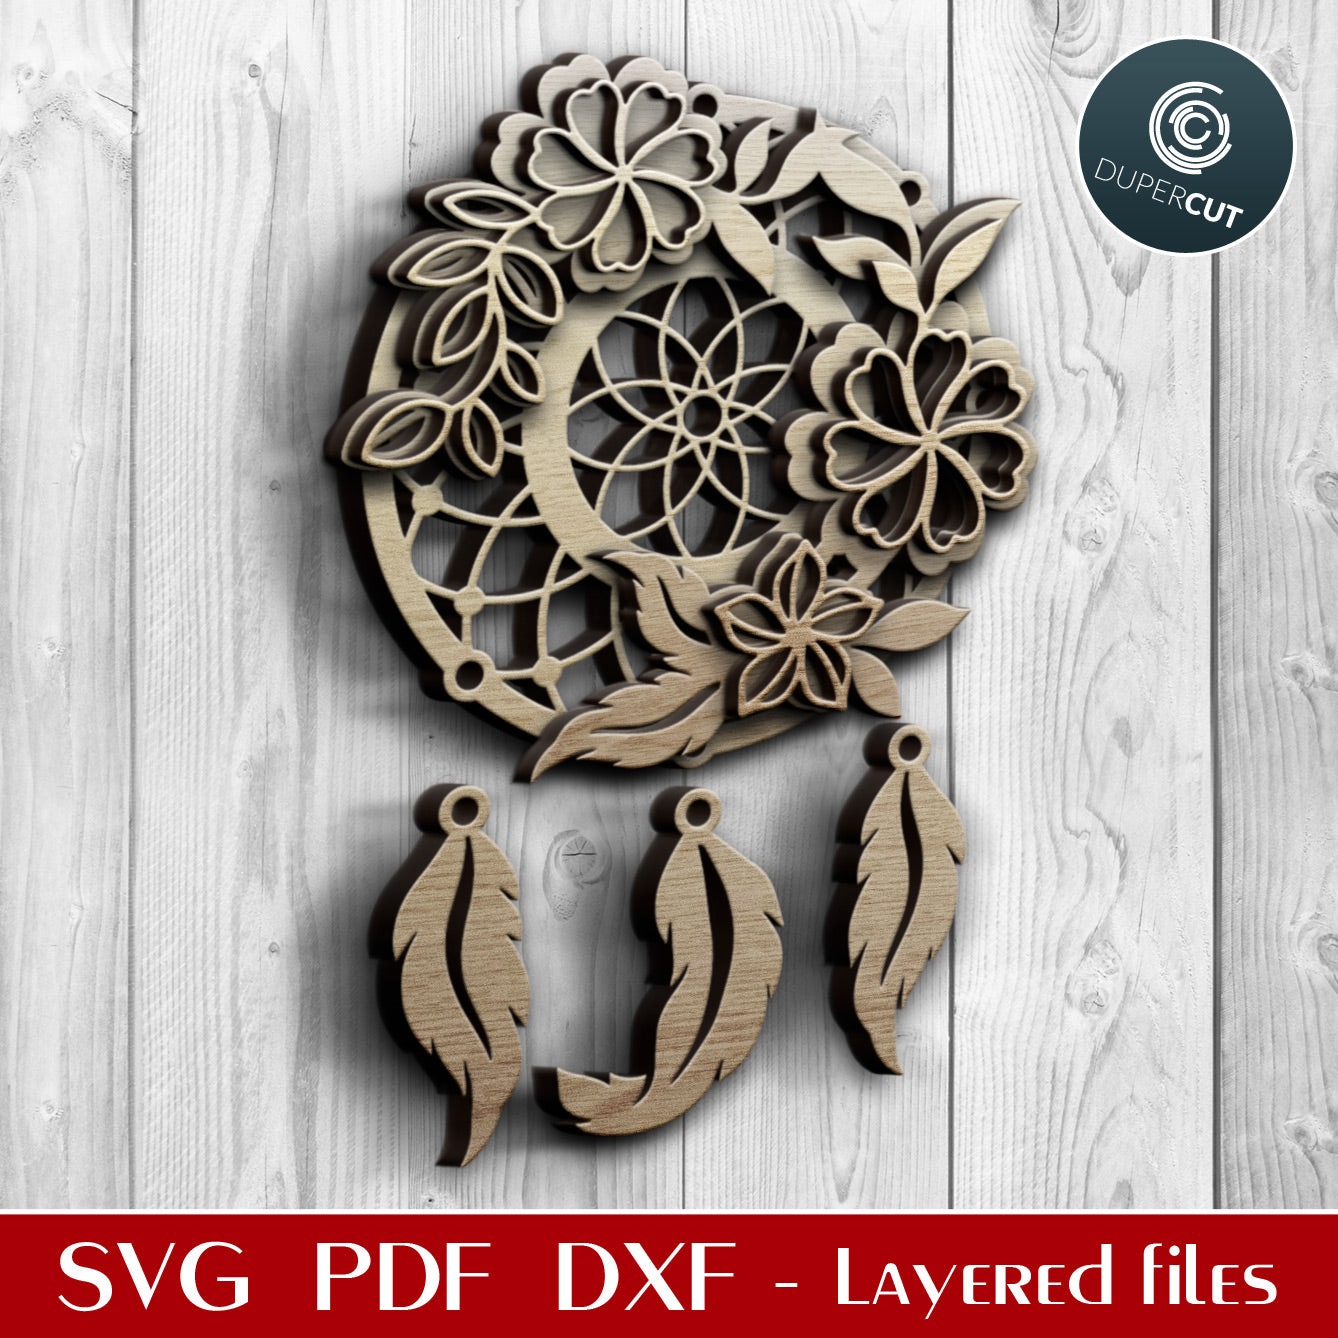 Dreamcatcher with flowers and feathers - layered cutting template - SVG PDF DXF vector files for laser cutting with Glowforge, Cricut, Silhouette Cameo, CNC plasma machines